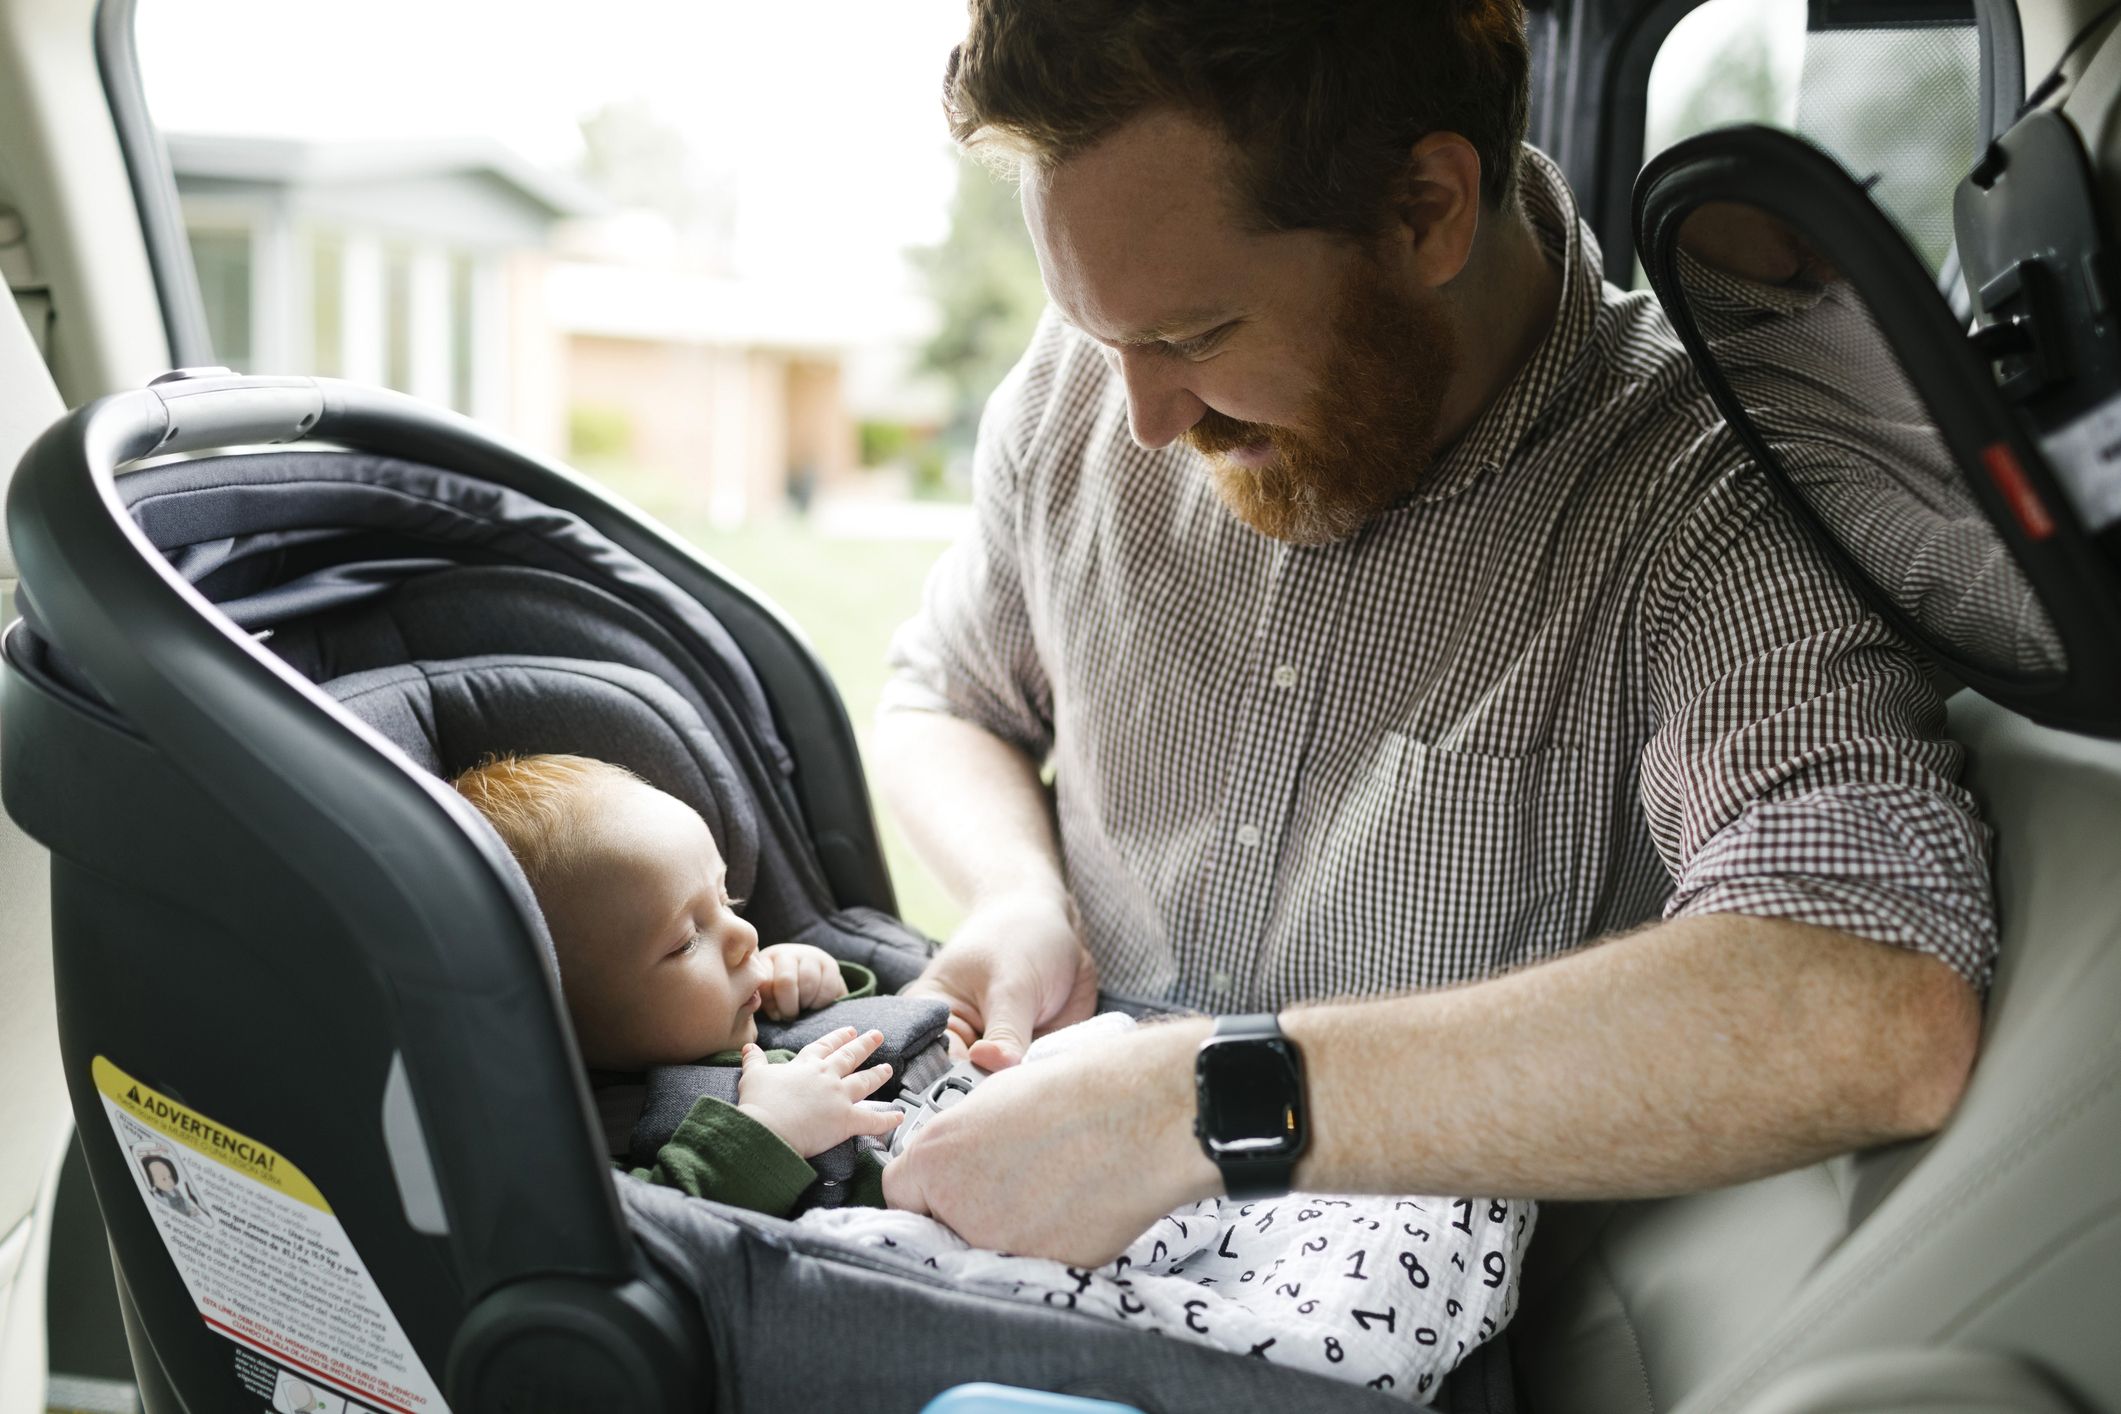 All About the Best Baby Car Seats